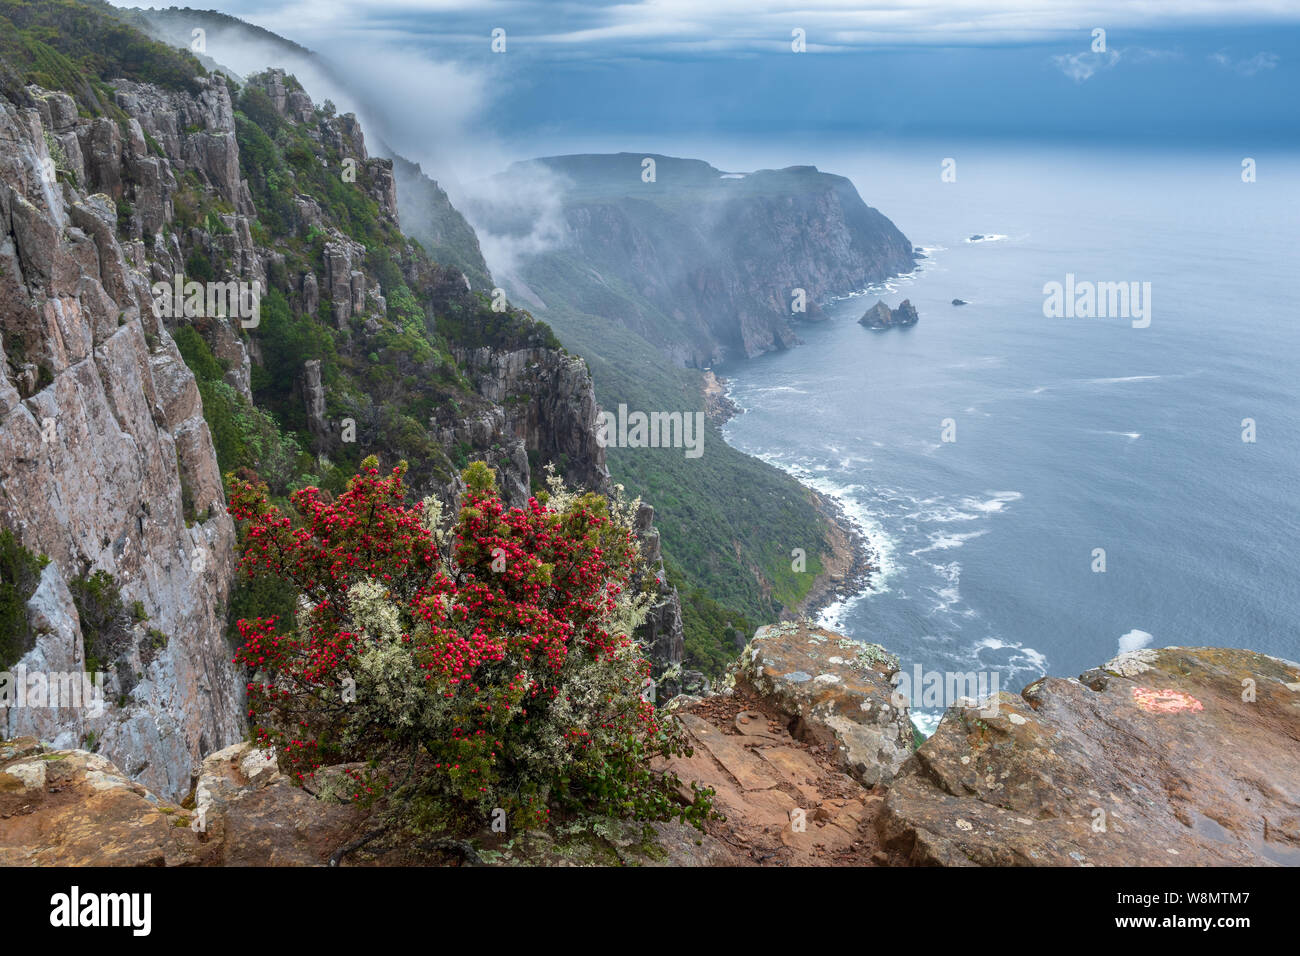 View over cliffs of Cape Raoul in mist with red-berry-bush in foreground, Tasmania Australia Stock Photo